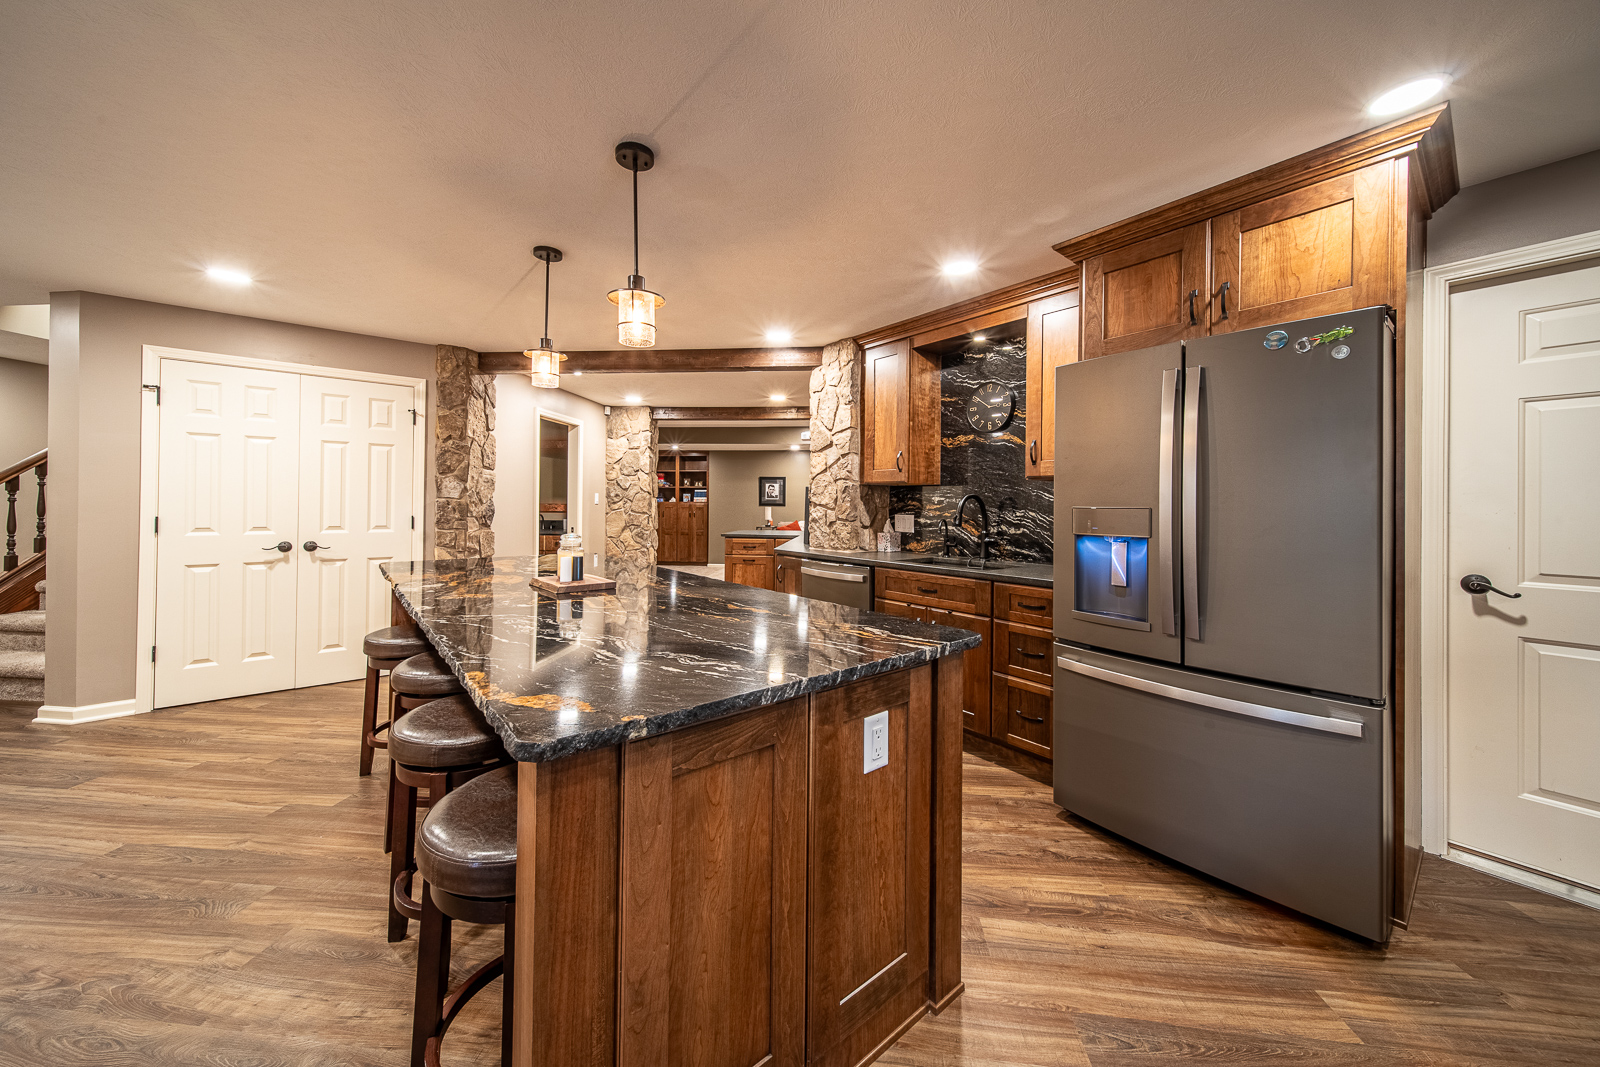 Modern kitchen area with full amenities in the Ripple Creek Drive basement remodel.